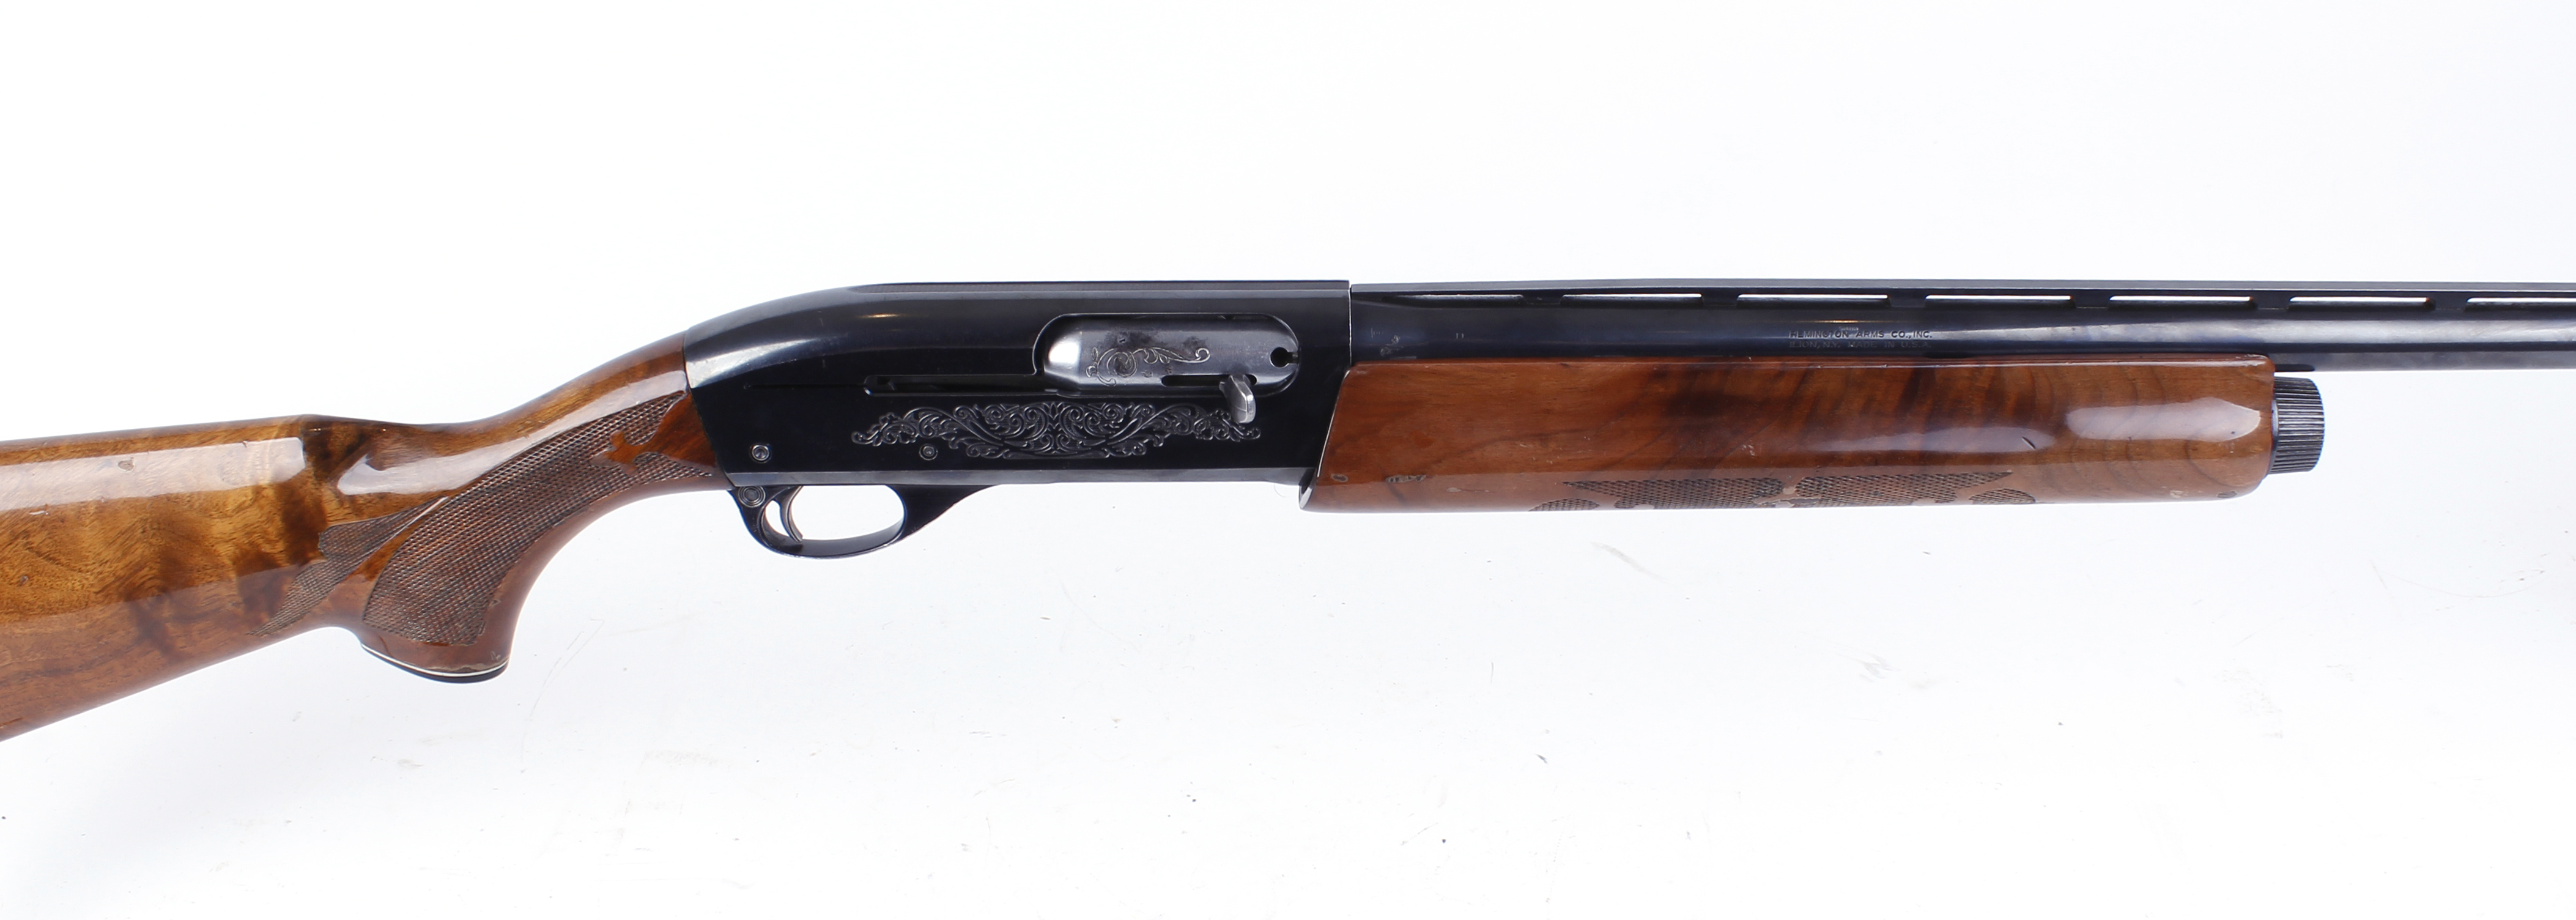 S2 12 bore Remington 1100 semi automatic, 3 shot, no. N593423V (Section 2 Licence required)